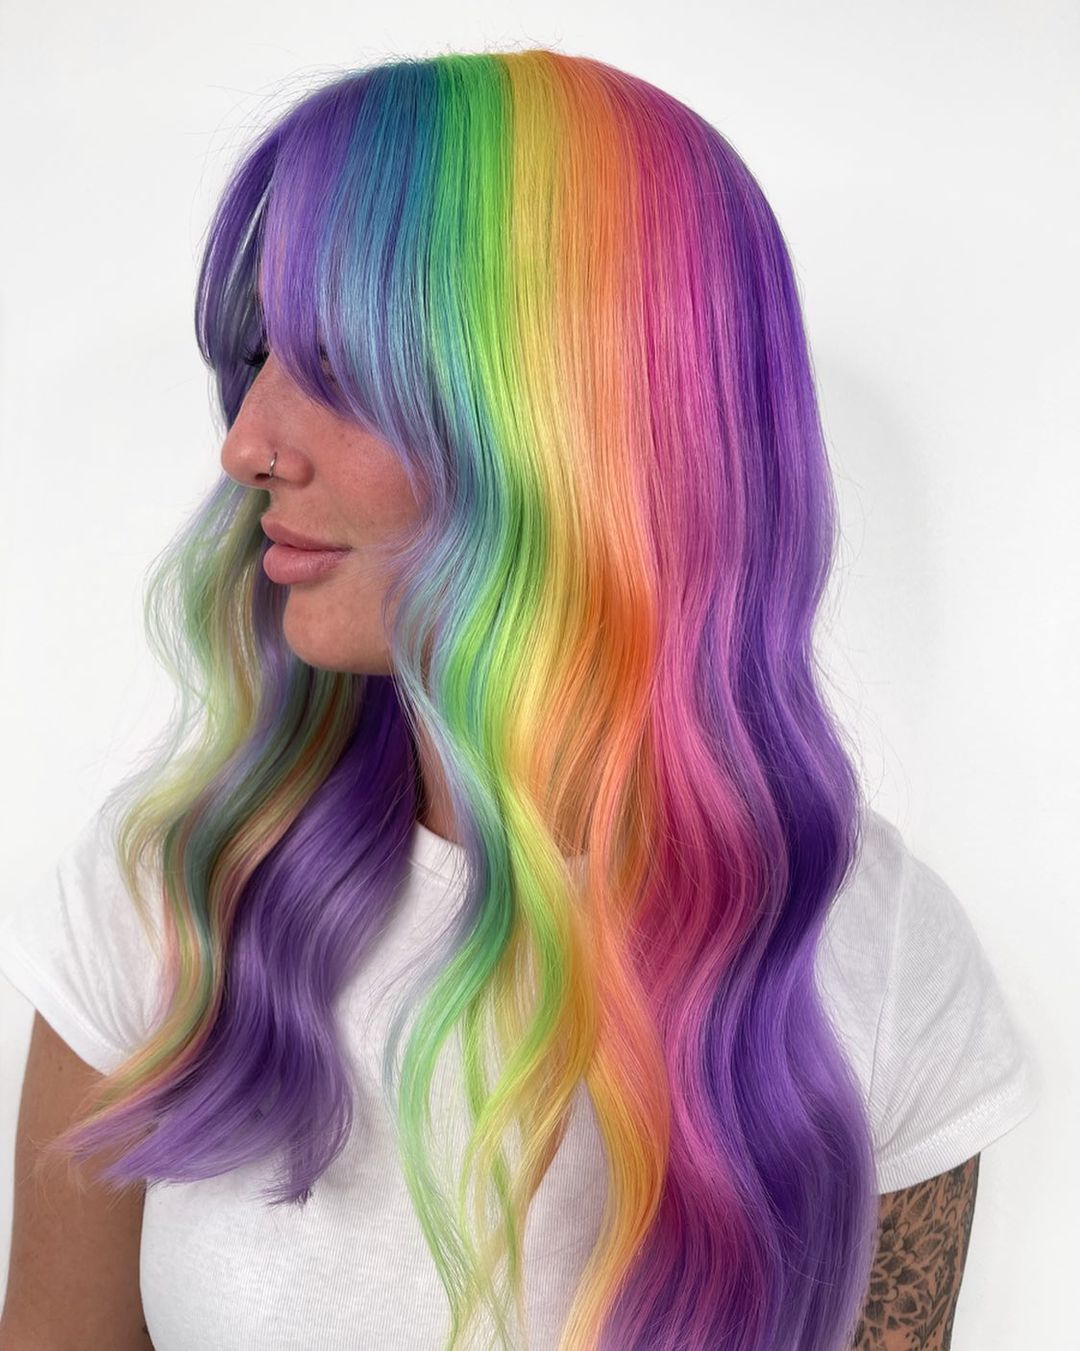 Magical and Vibrant Hair Color Ideas Inspired by Unicorns